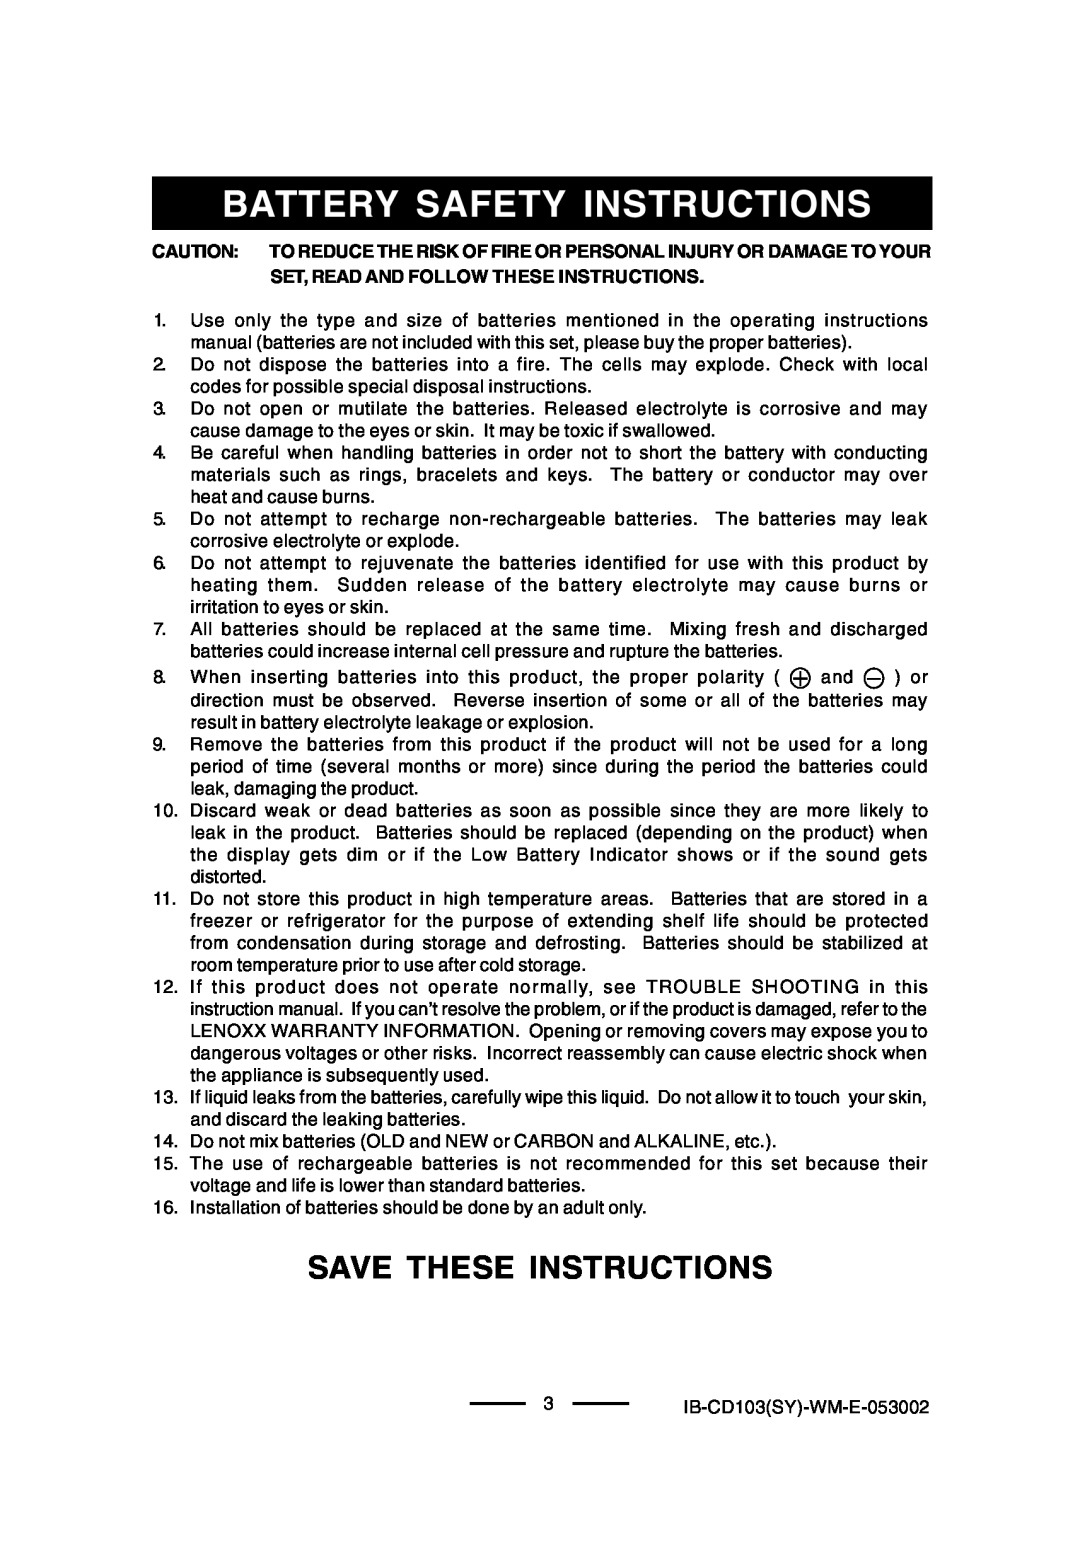 Lenoxx Electronics CD-103, BP-103 operating instructions Save These Instructions, Battery Safety Instructions 